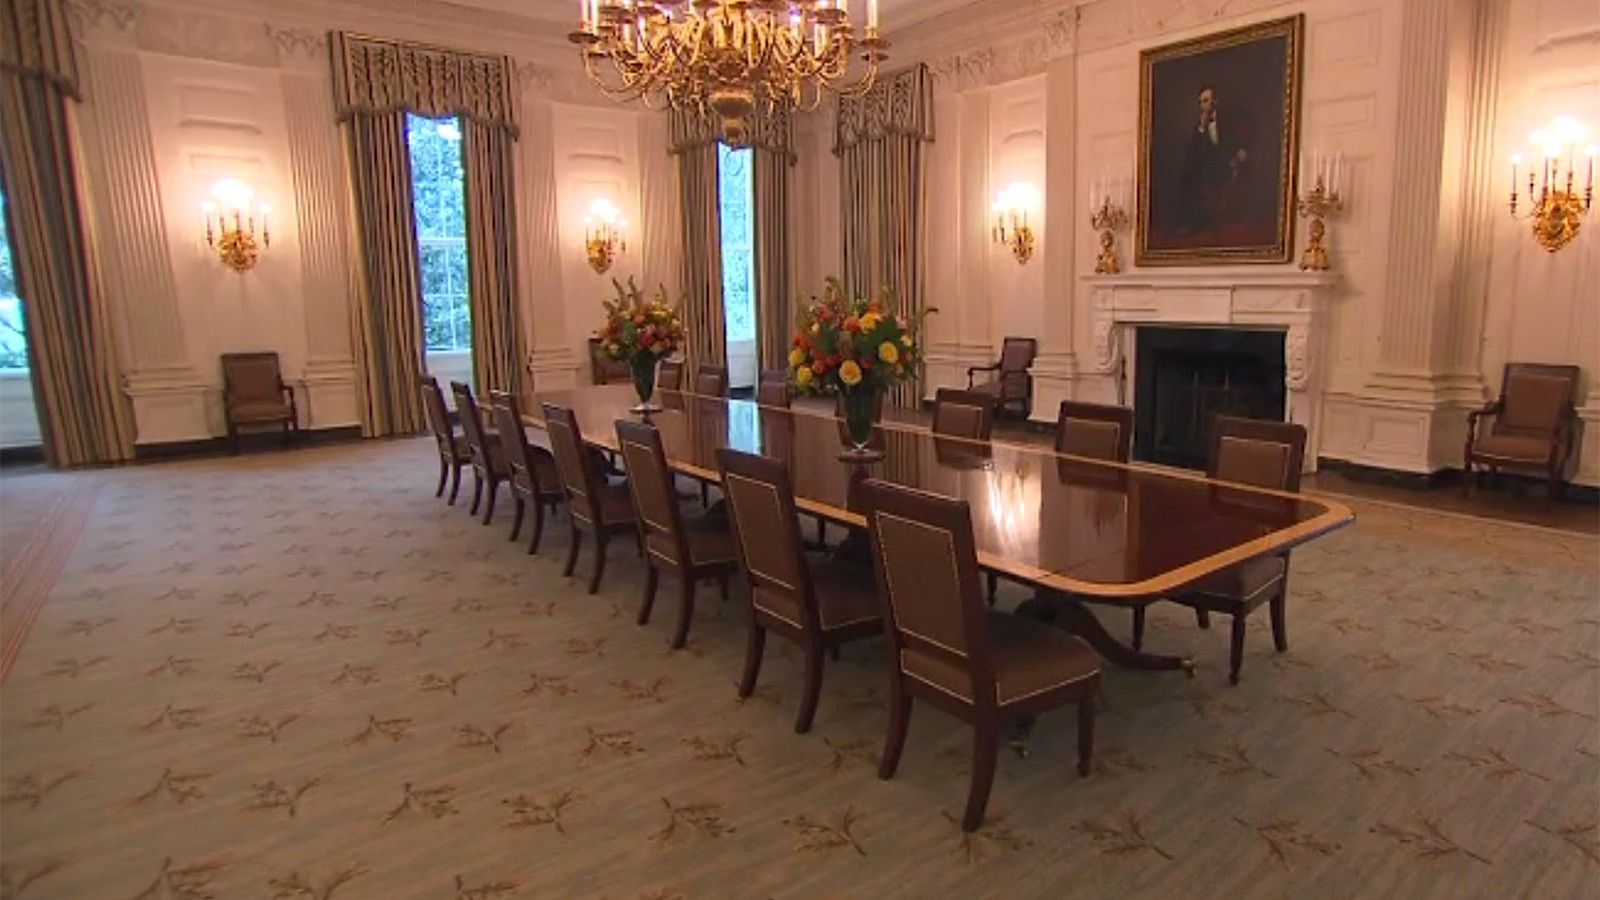 Changes To Whitehouse Dining Room Over The Years